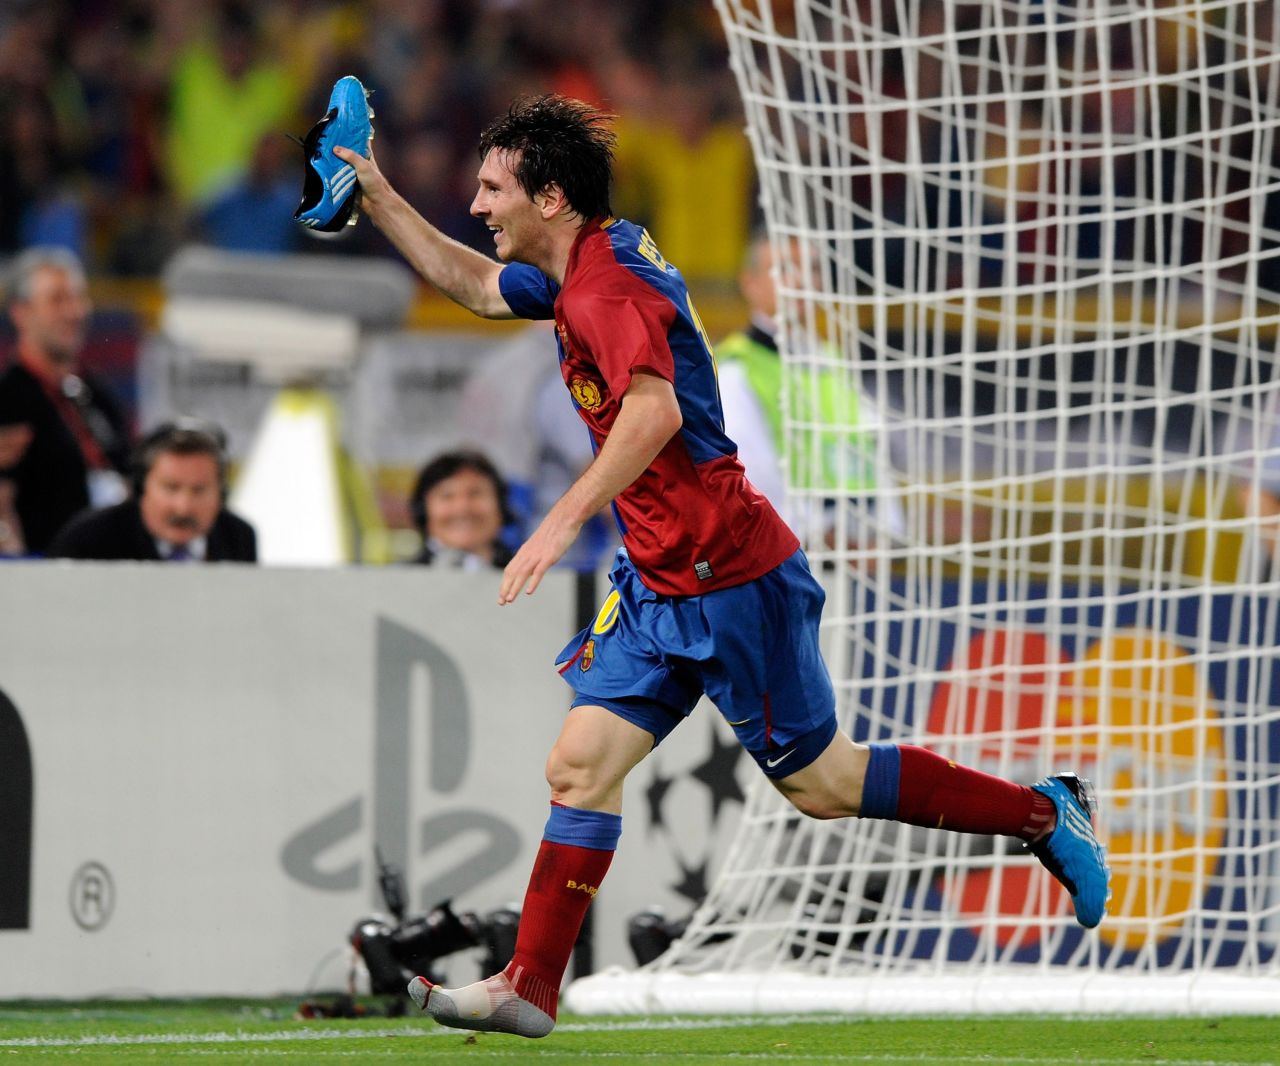 Messi headed the second goal as Barca comprehensively outplayed Manchester United in the 2009 European Champions League final, registering a 2-0 win in Rome.